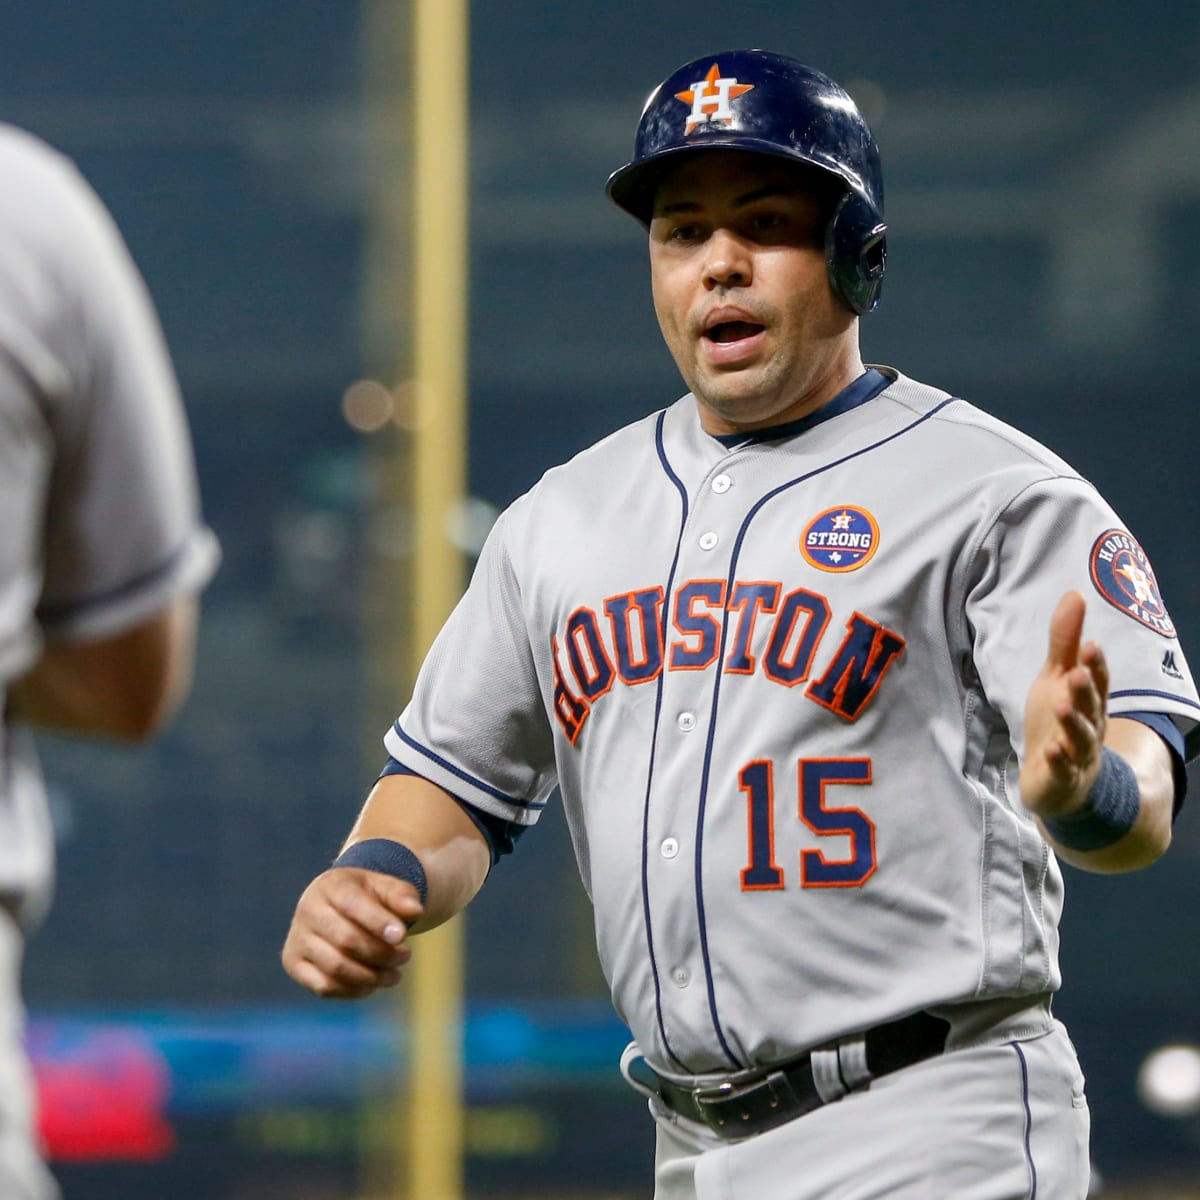 Catch This: Astros hold mock funeral for Beltran's glove